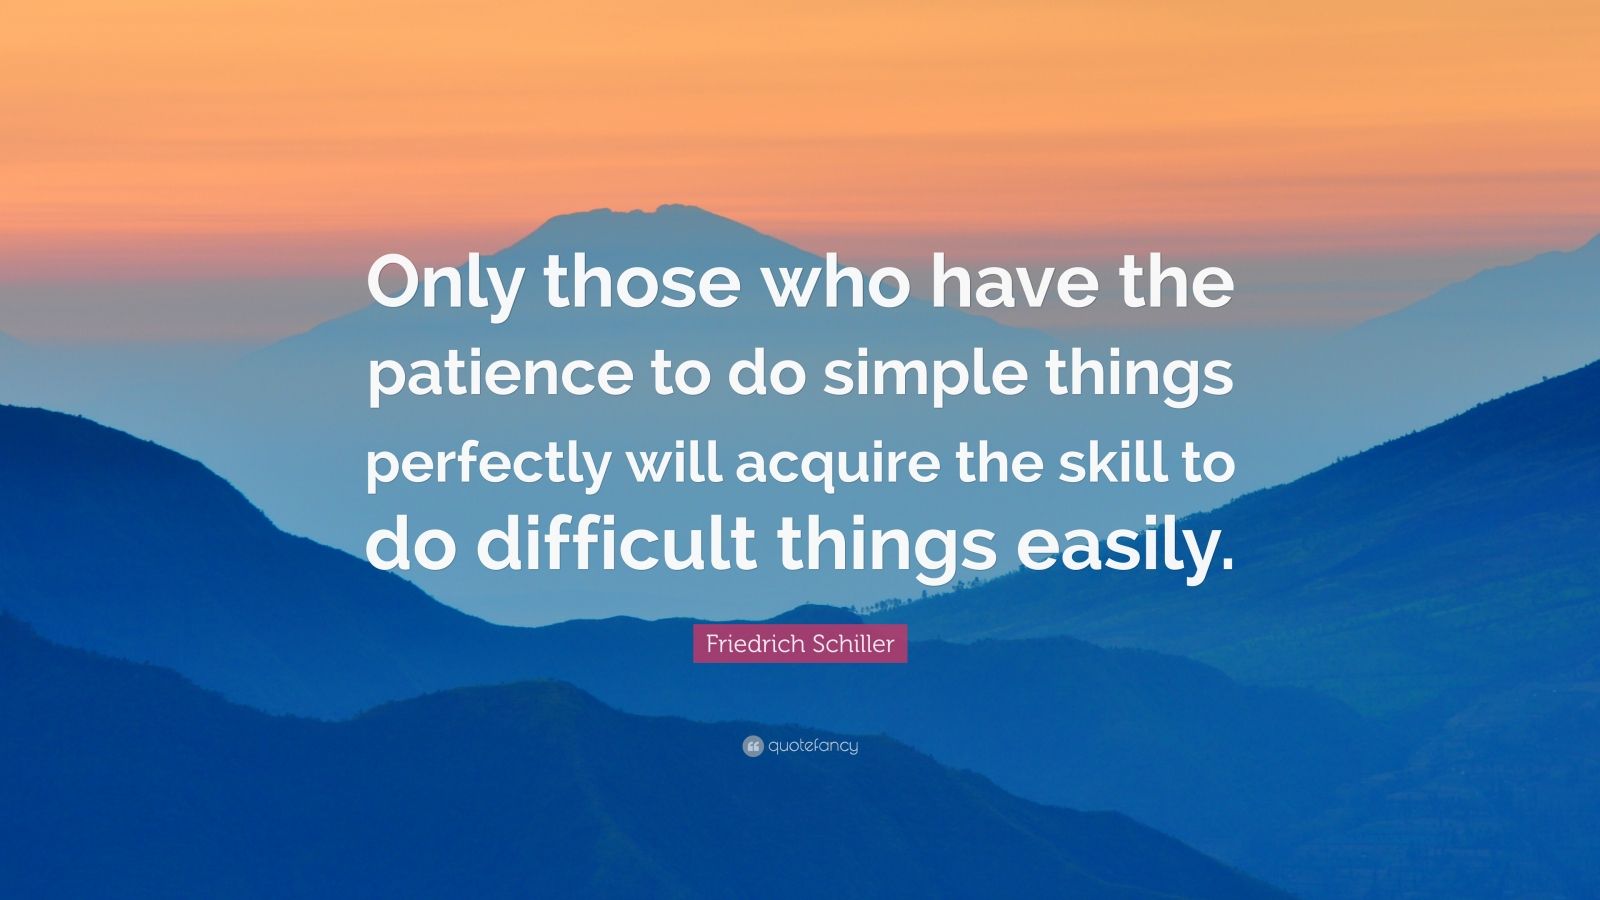 Friedrich Schiller Quote: “Only those who have the patience to do ...